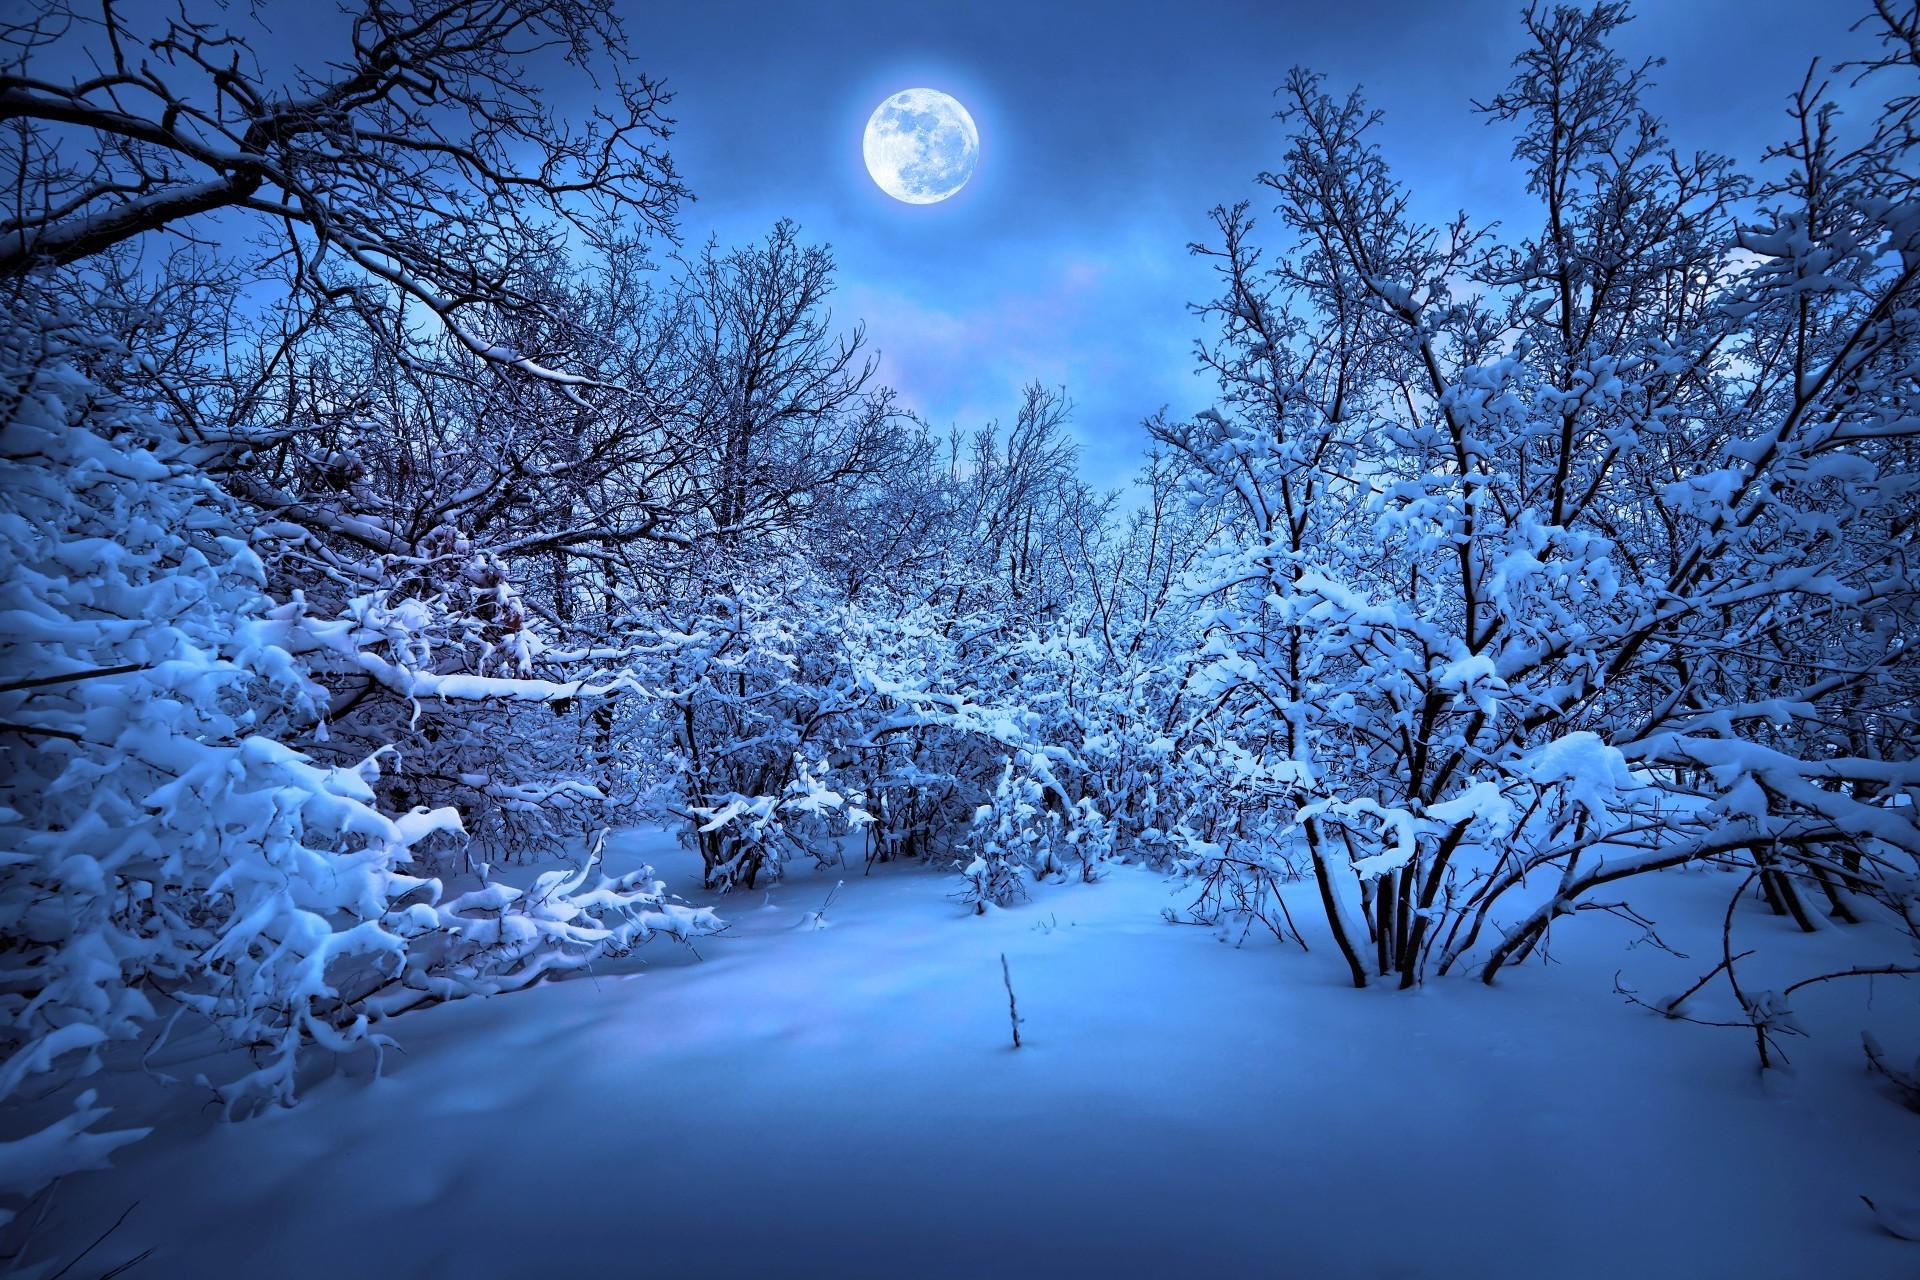 Night in the winter forest